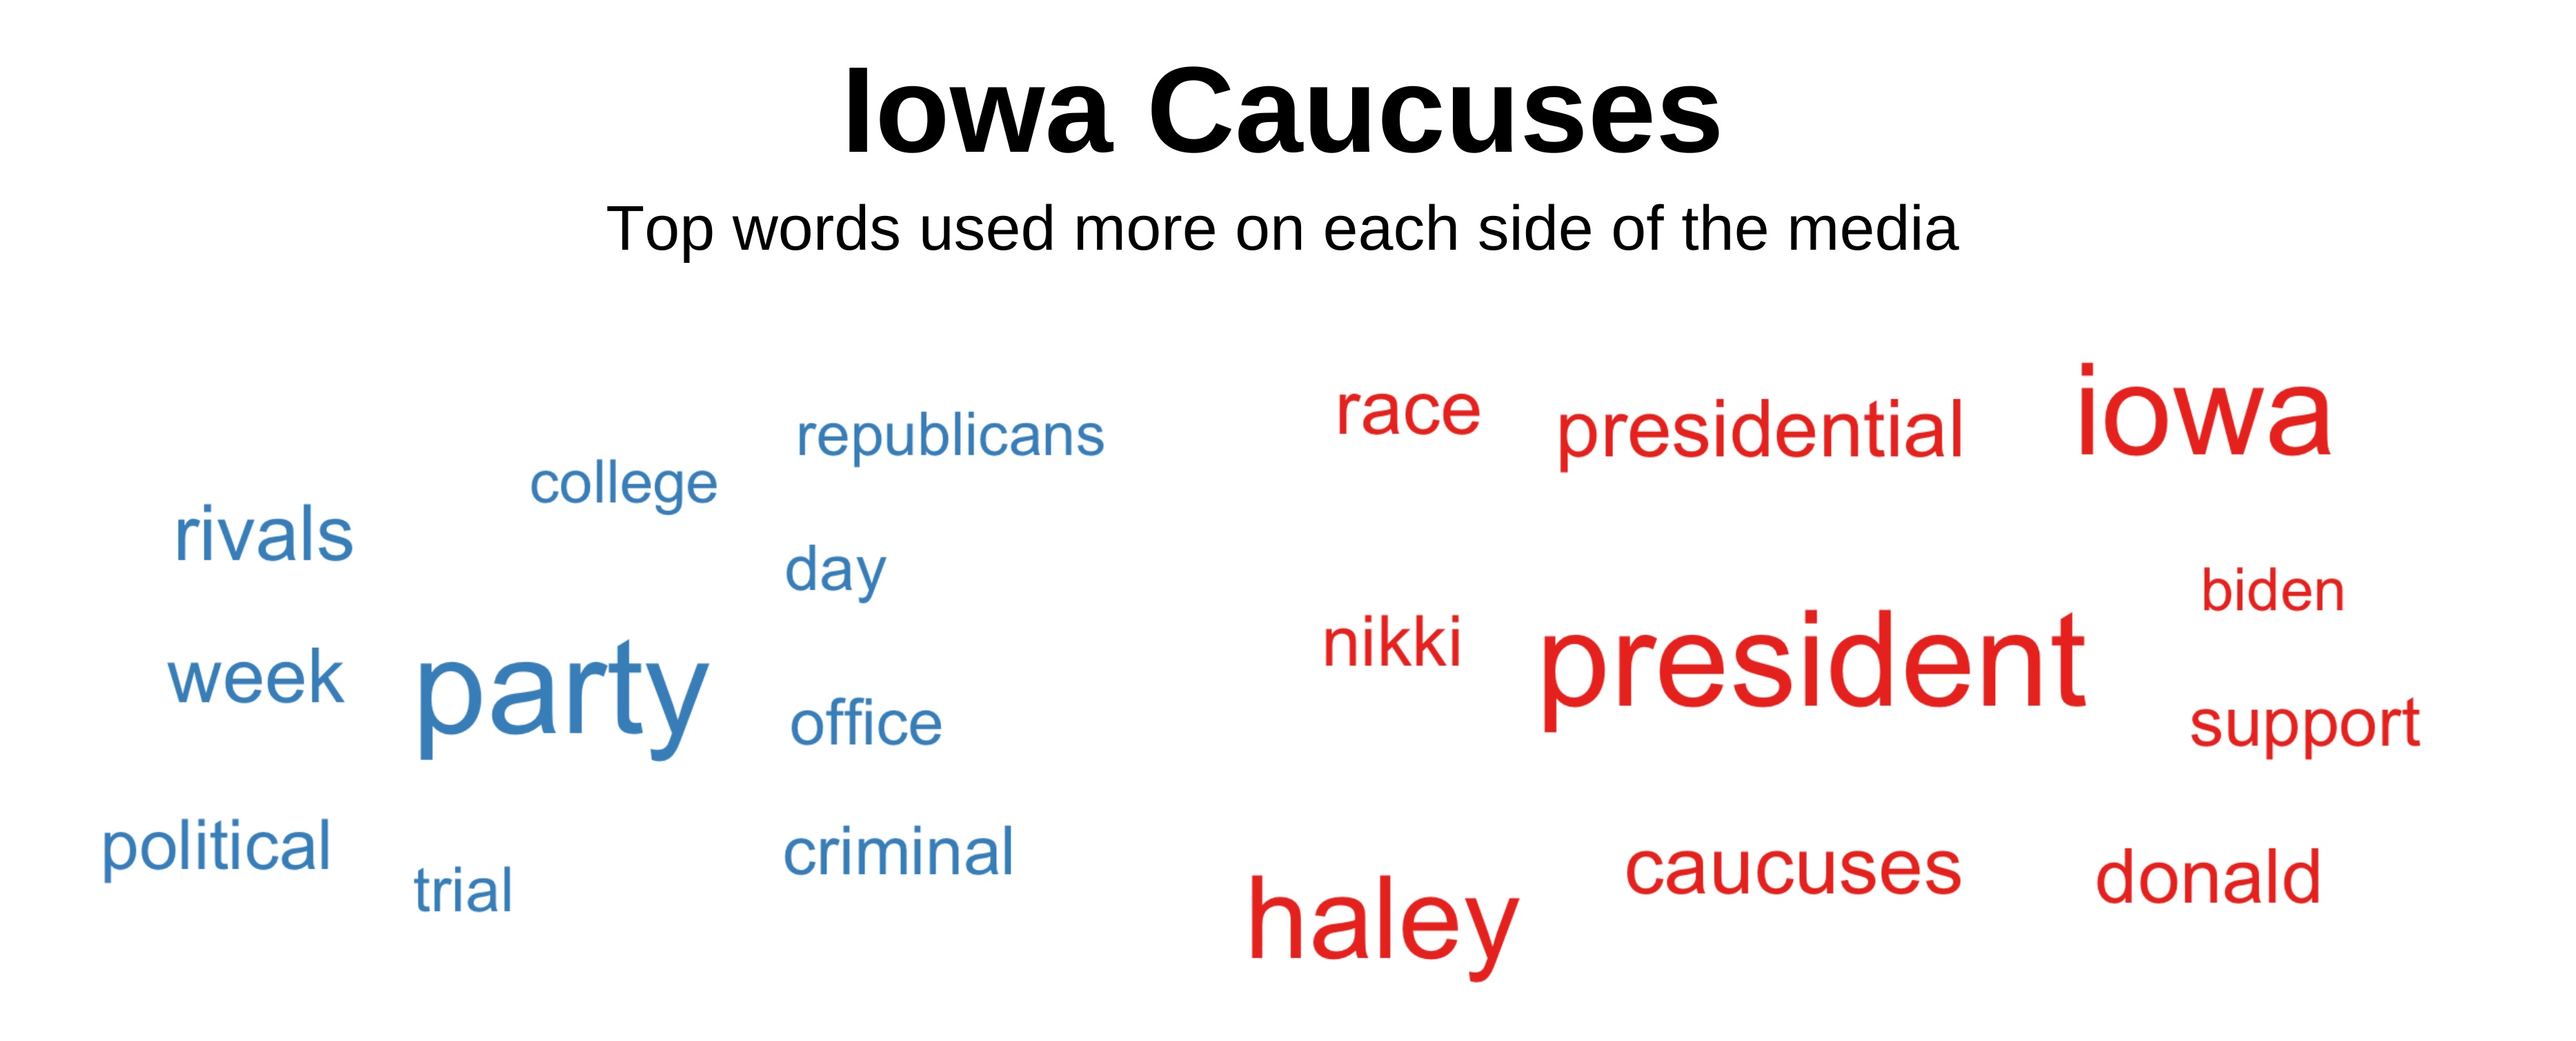 Top words about the Iowa caucus used more on each side of the media.